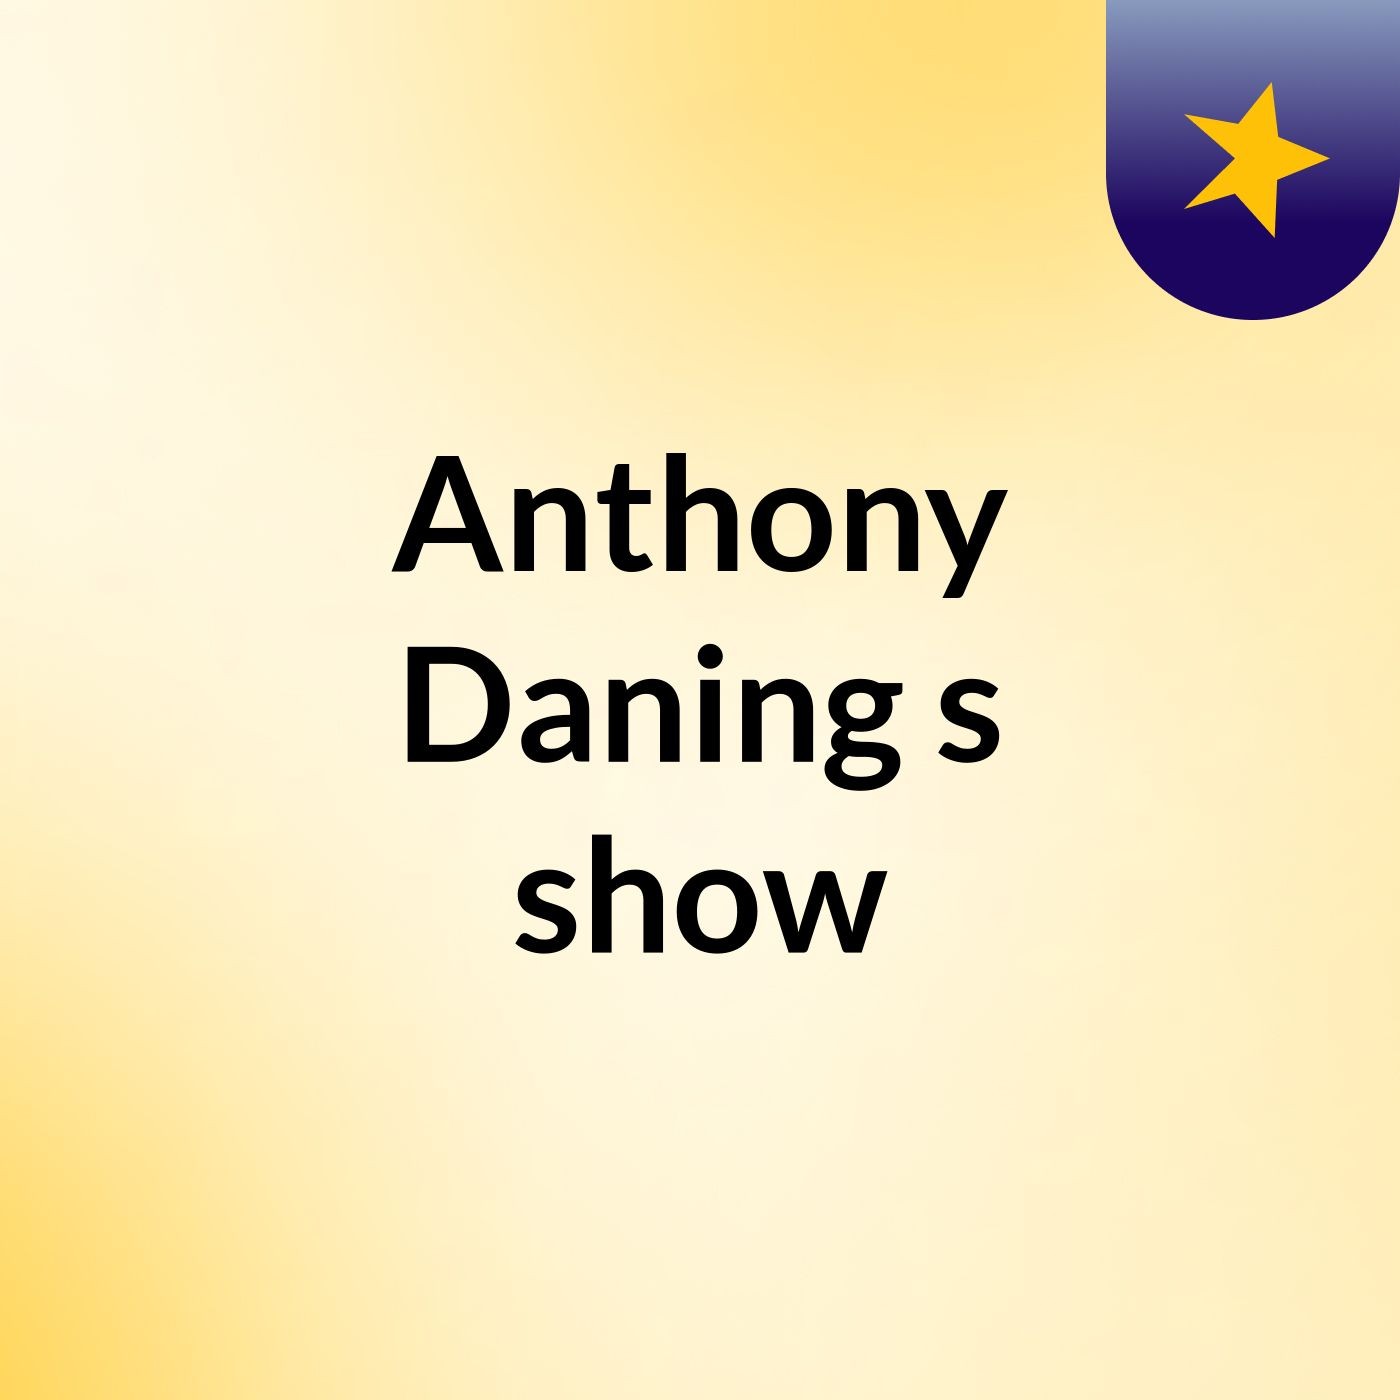 Anthony Daning's show